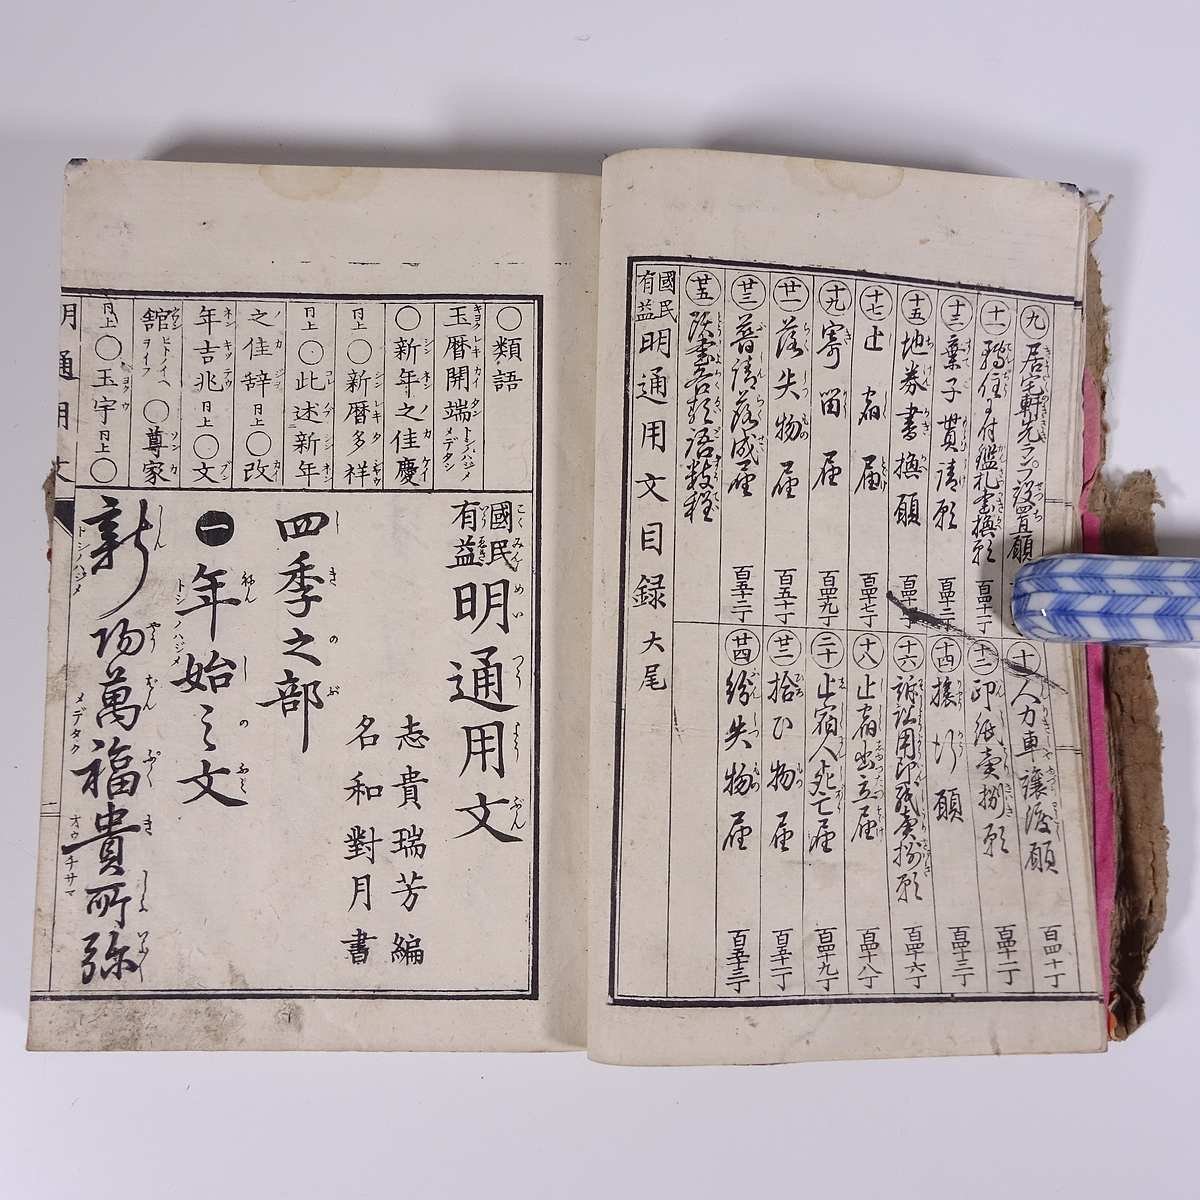 .. have . Akira circulation writing all .. edge . well-known peace against month paper length tail . Taro Meiji two three year 1890 old book peace .book@ letter article document calligraphy . character wool writing brush 